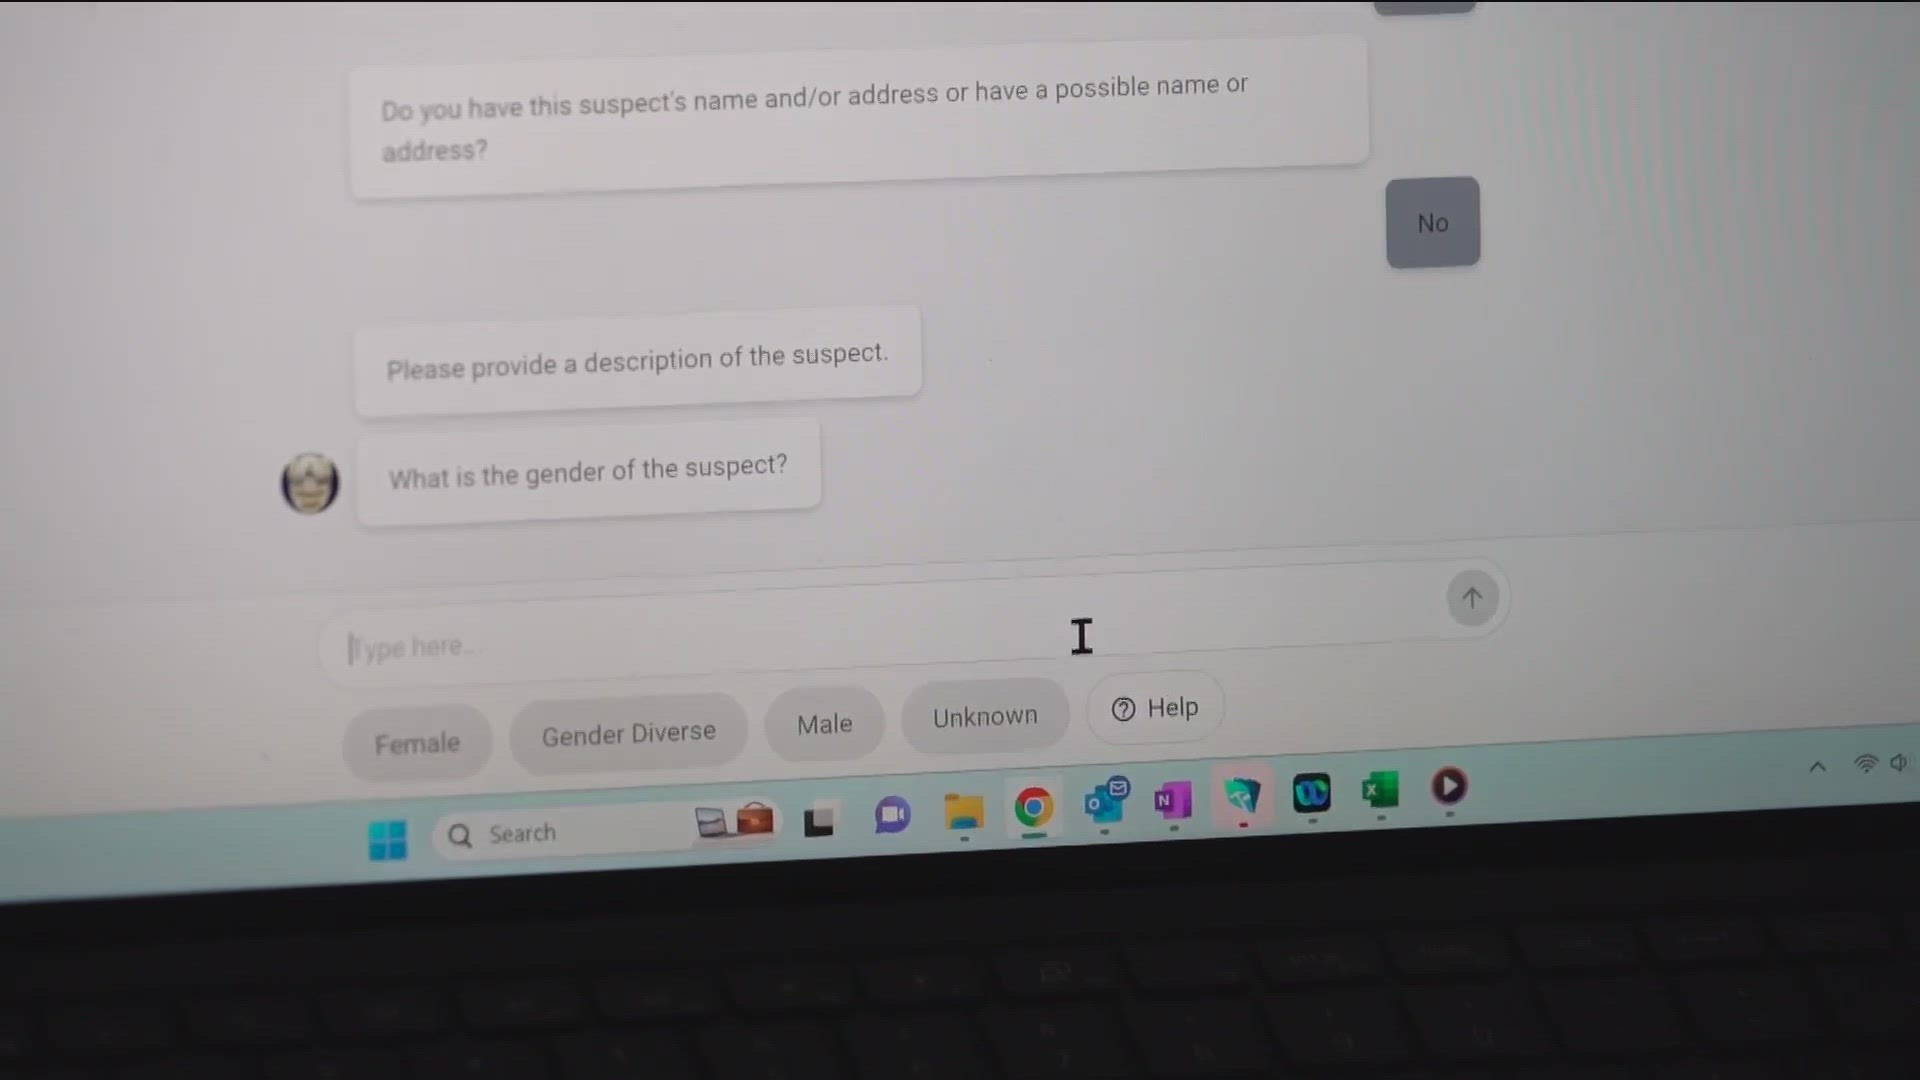 The Austin Police Department launched a special chat software to help take police reports. But some crime victims say it's not working the way it should.